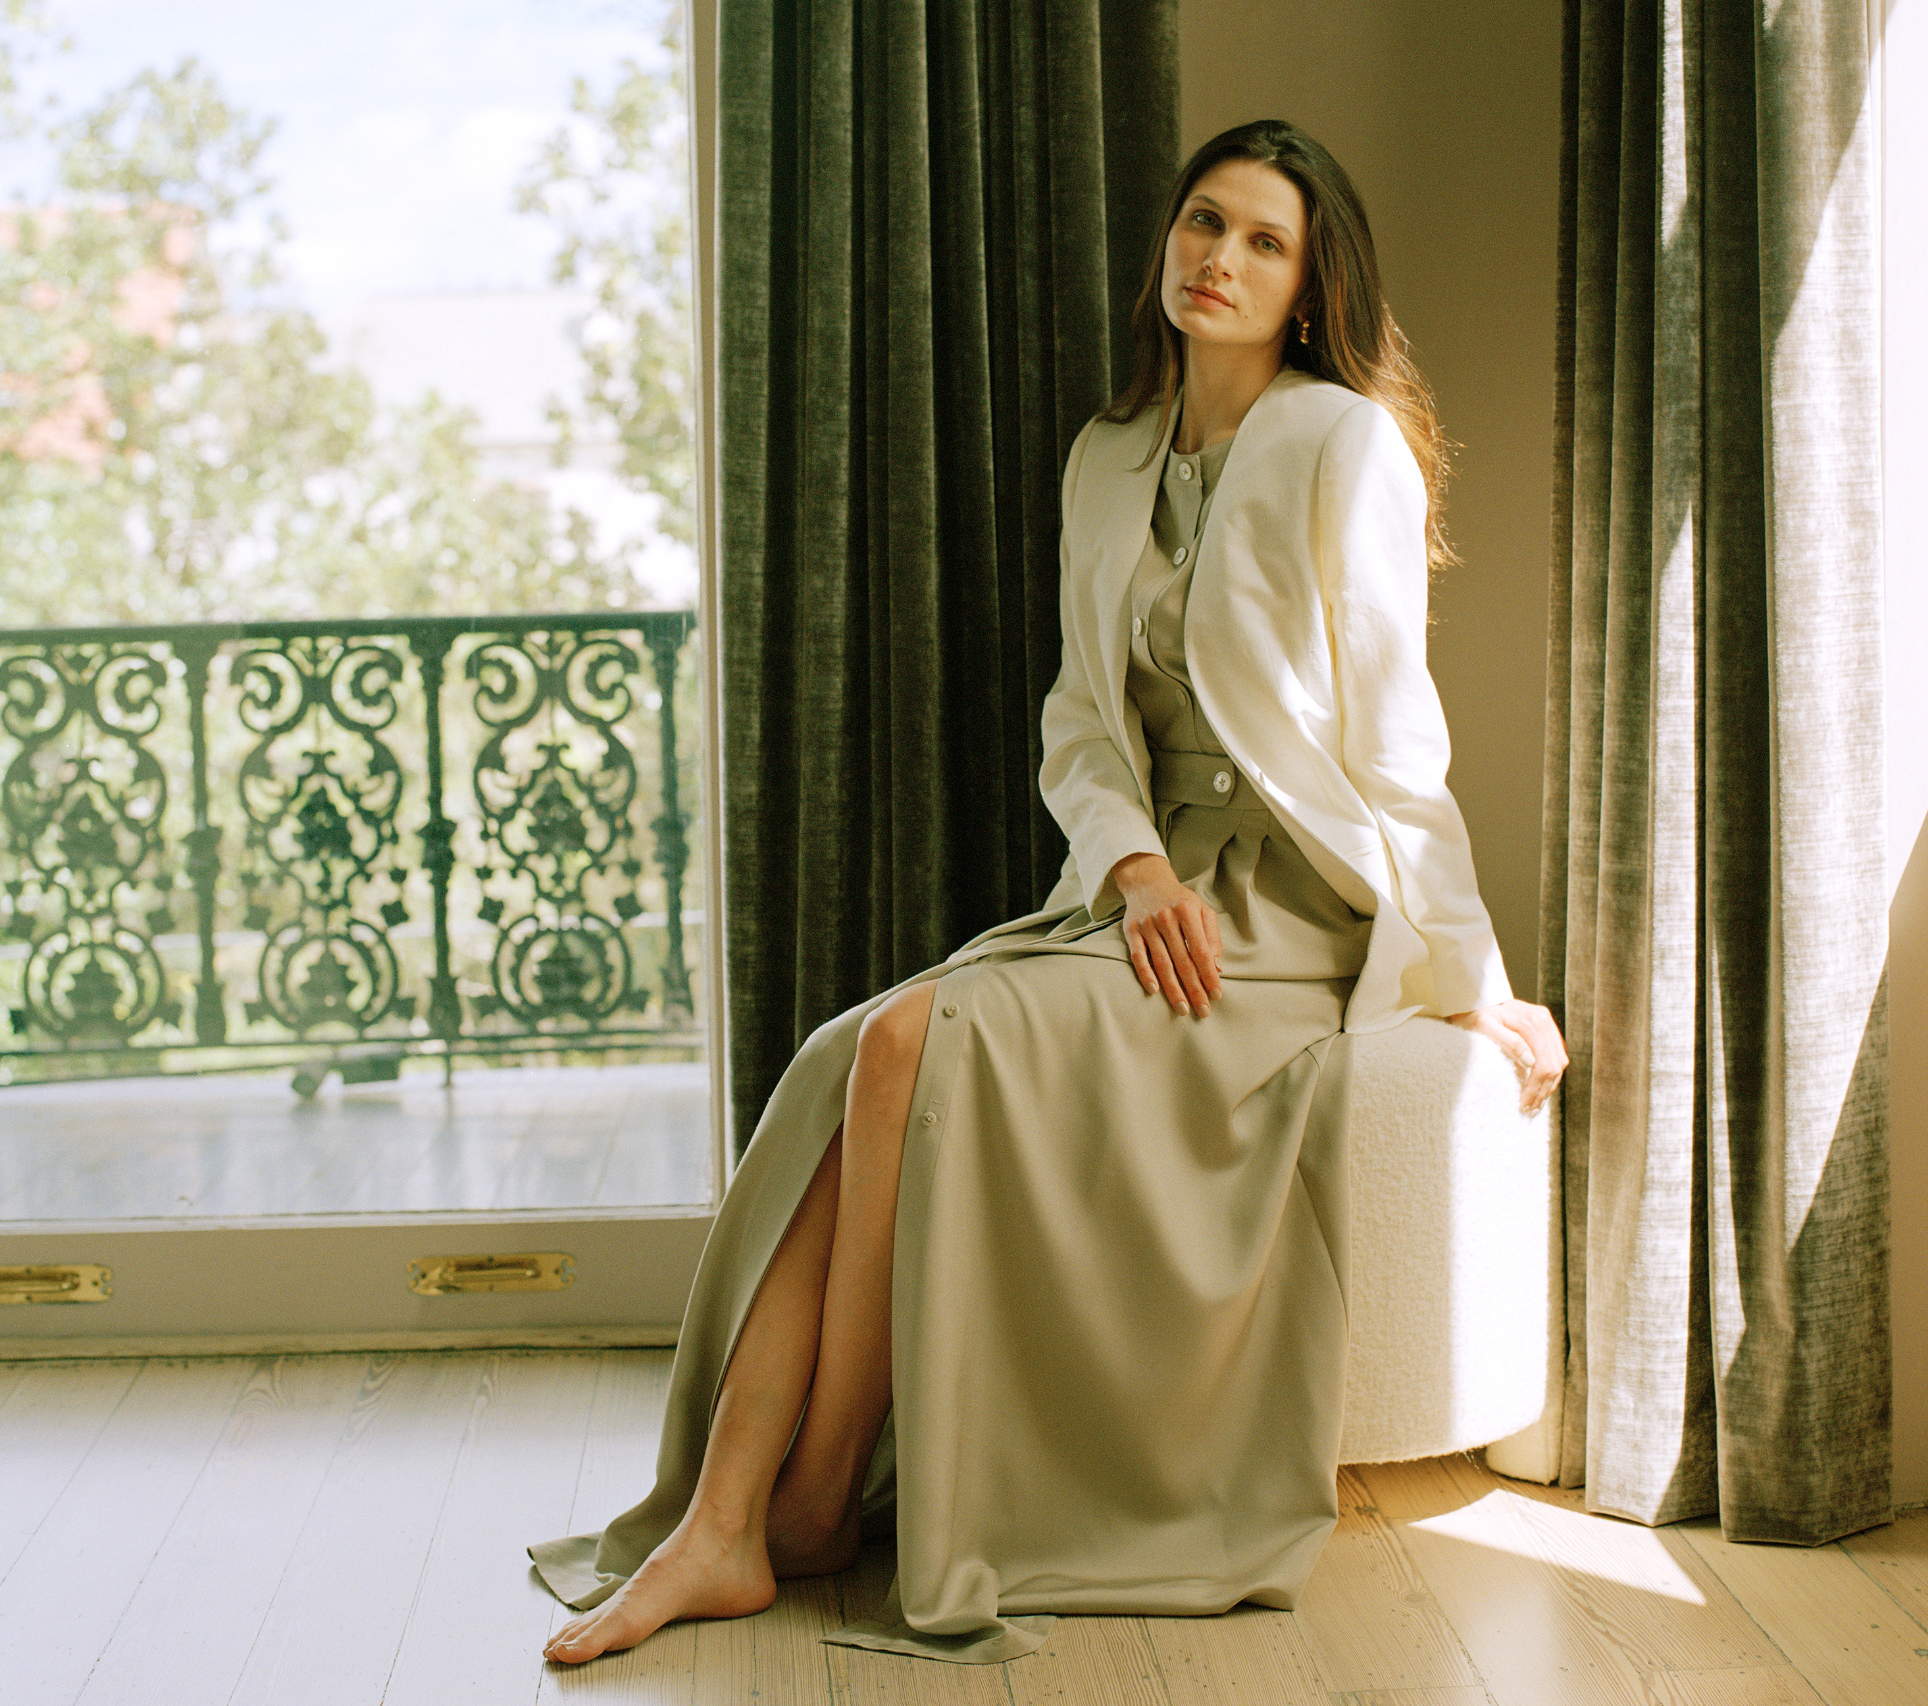 LAKAN Releases Debut Womenswear Collection